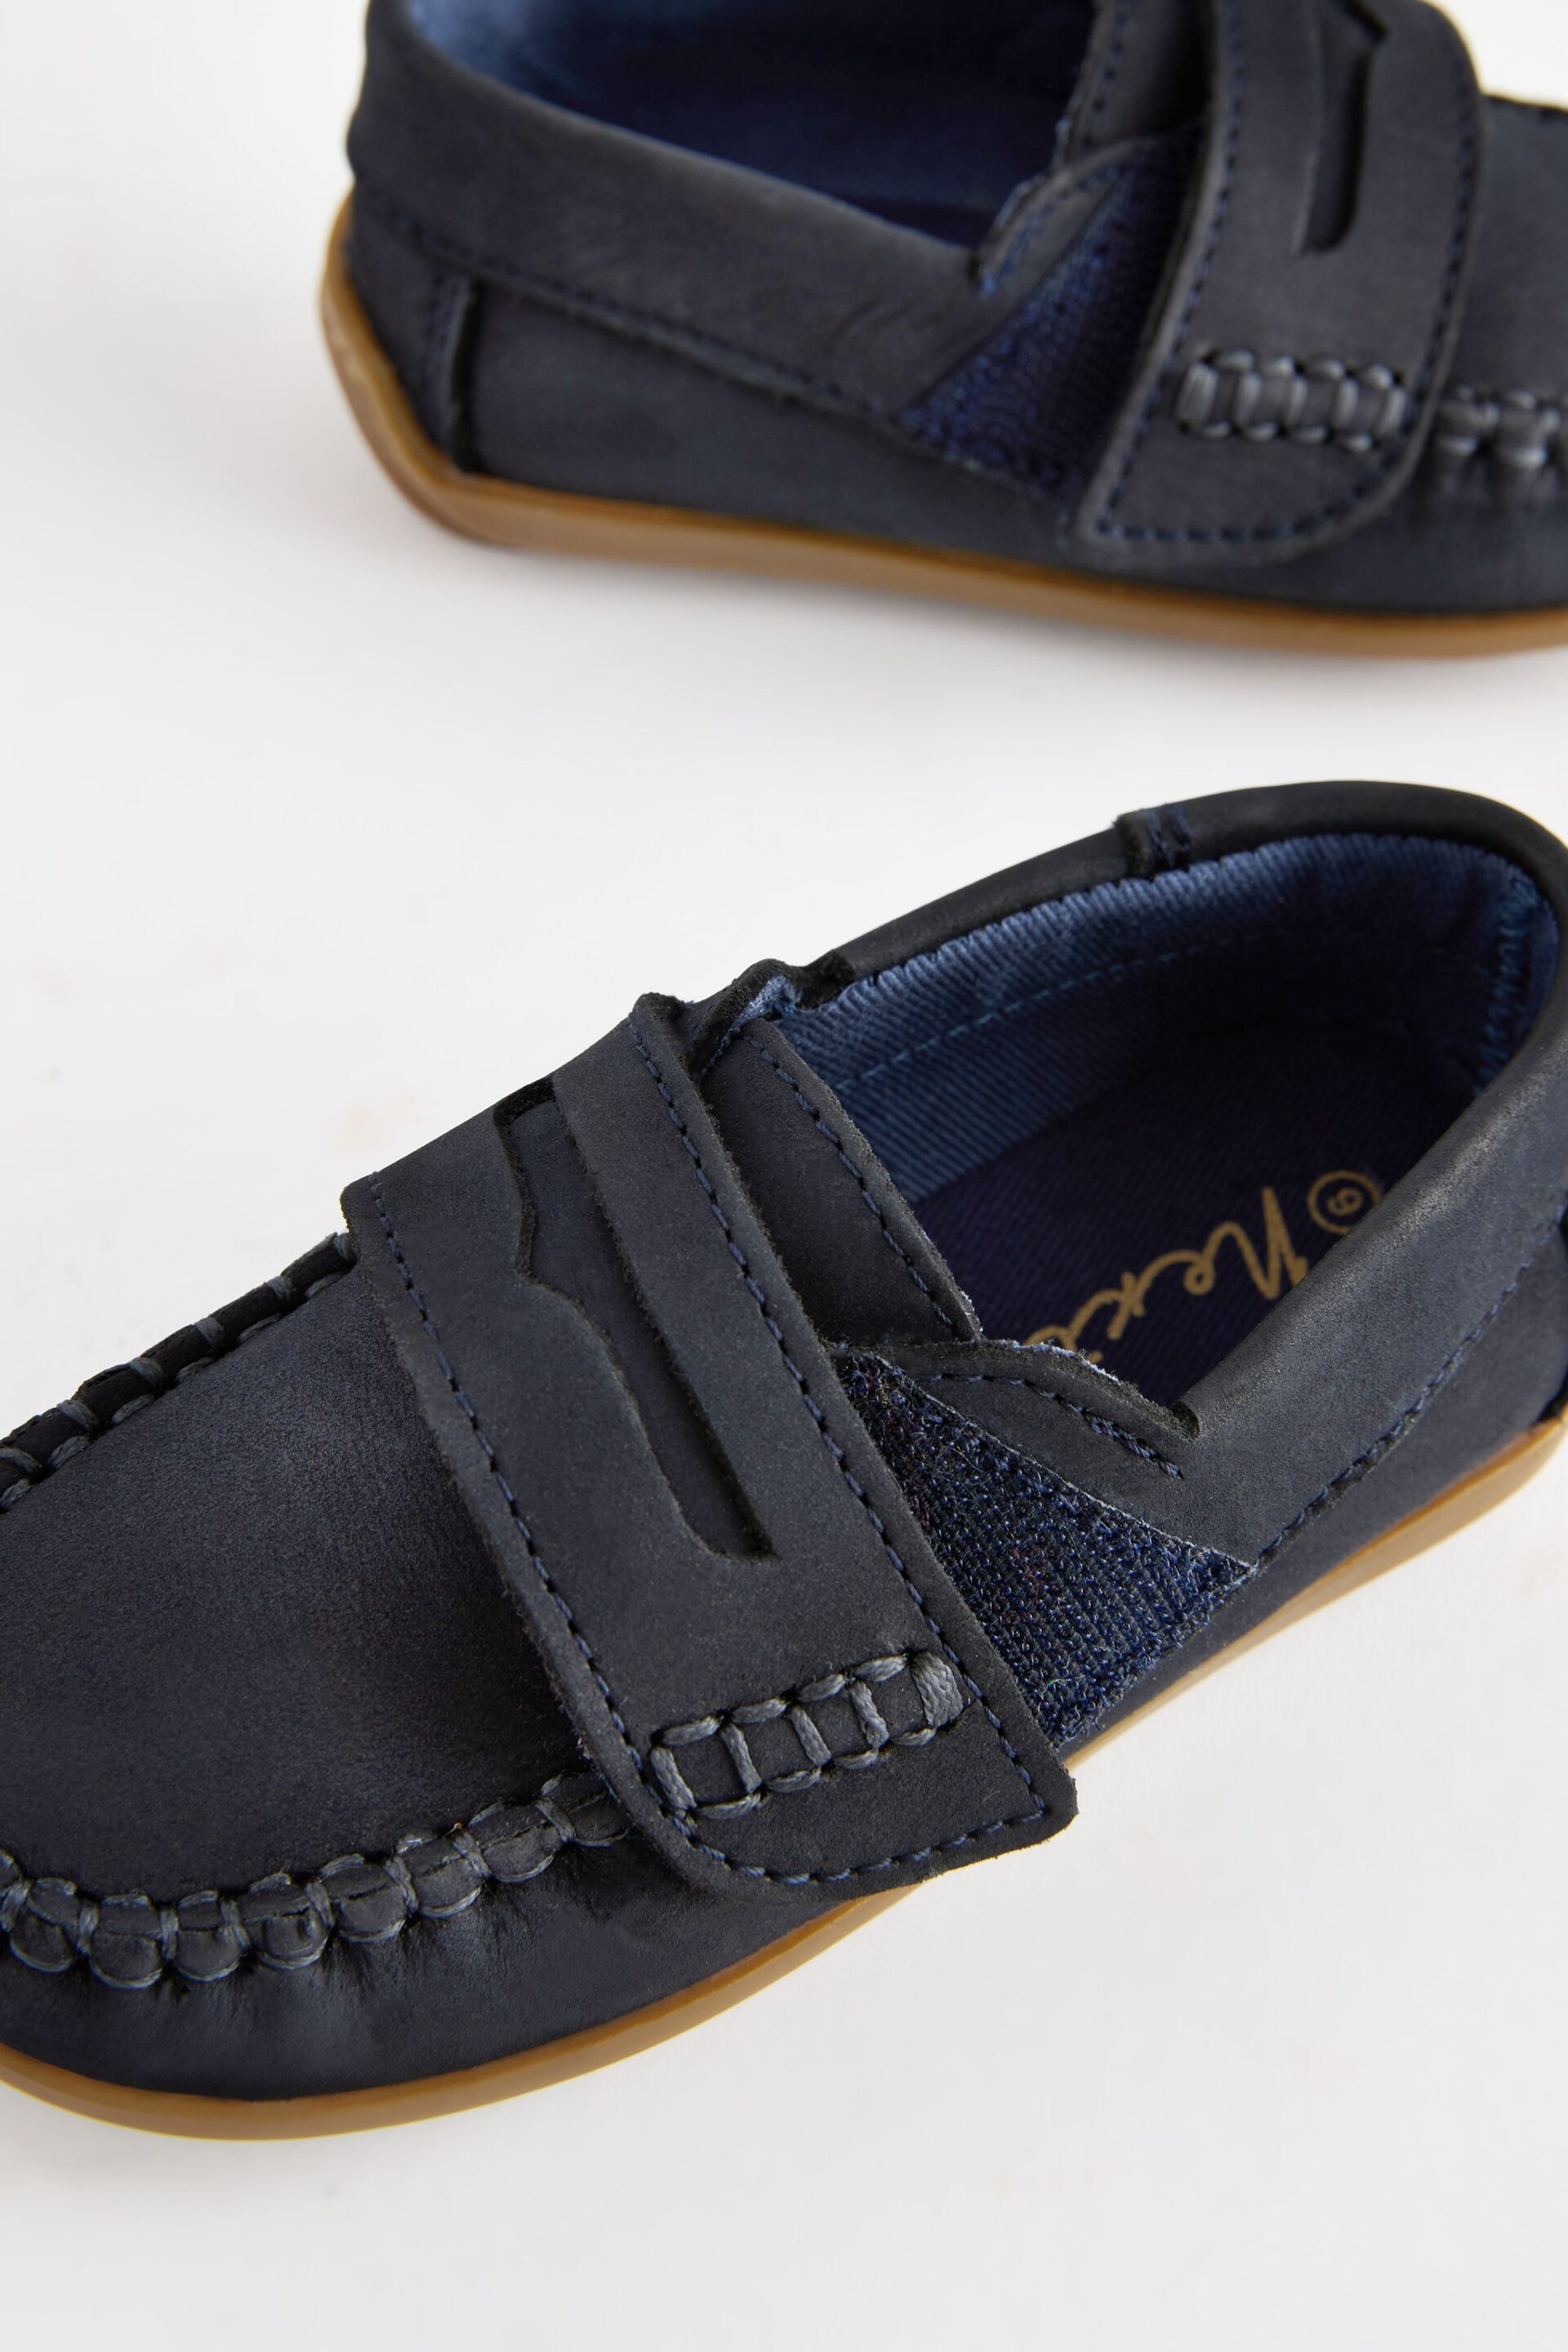 Navy Wide Fit (G) Leather Penny Loafers with Touch and Close Fastening - Image 5 of 7